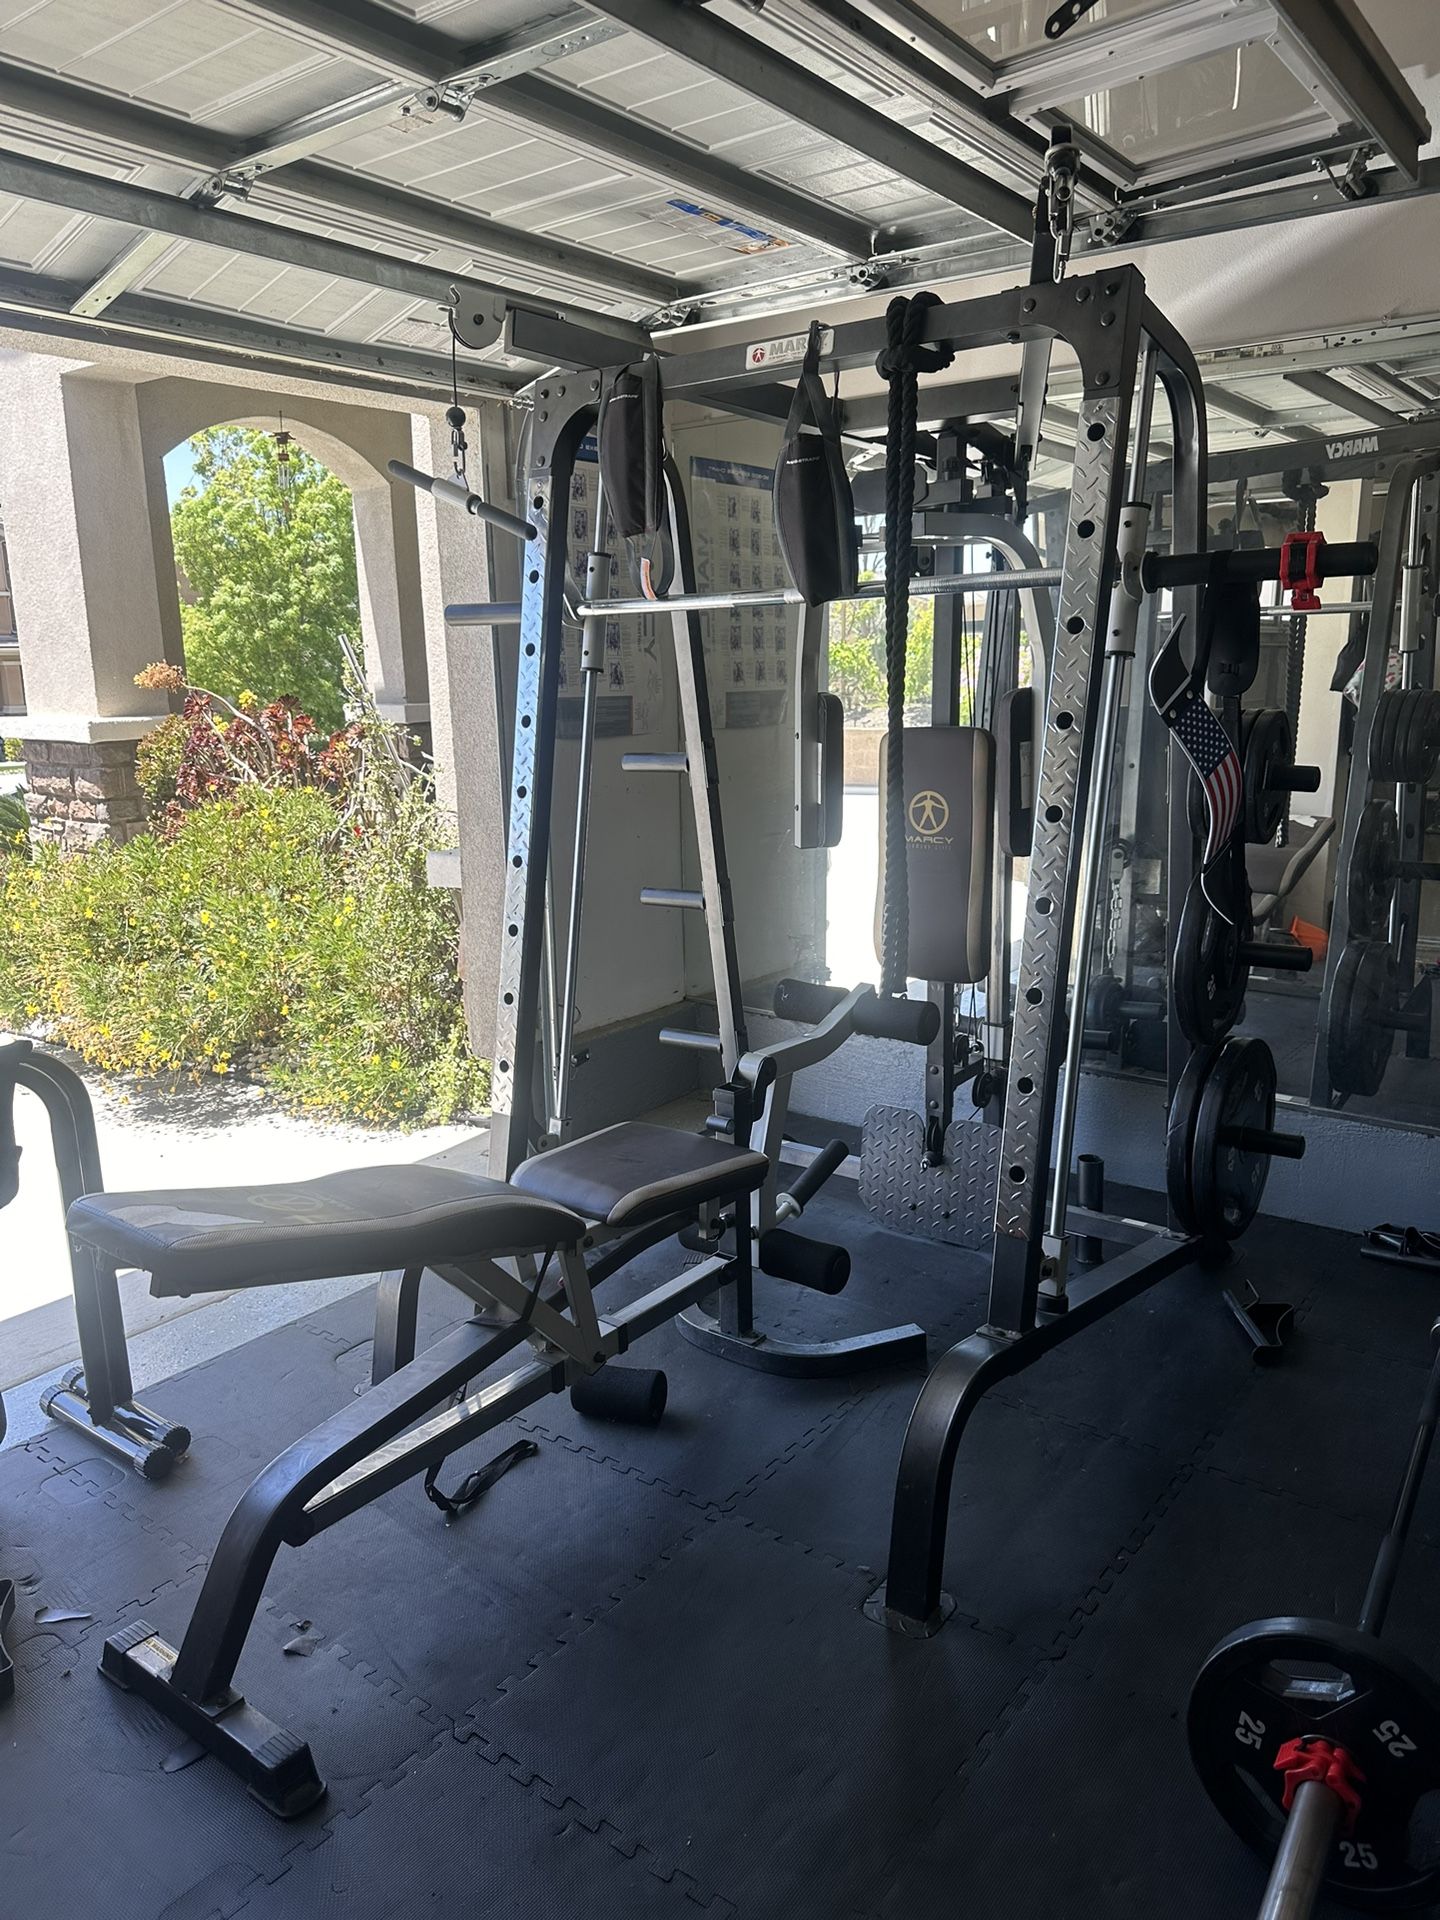 Gym Equipment- Marcy Smith Machine / Cage System with Pull-Up Bar and Landmine Station.